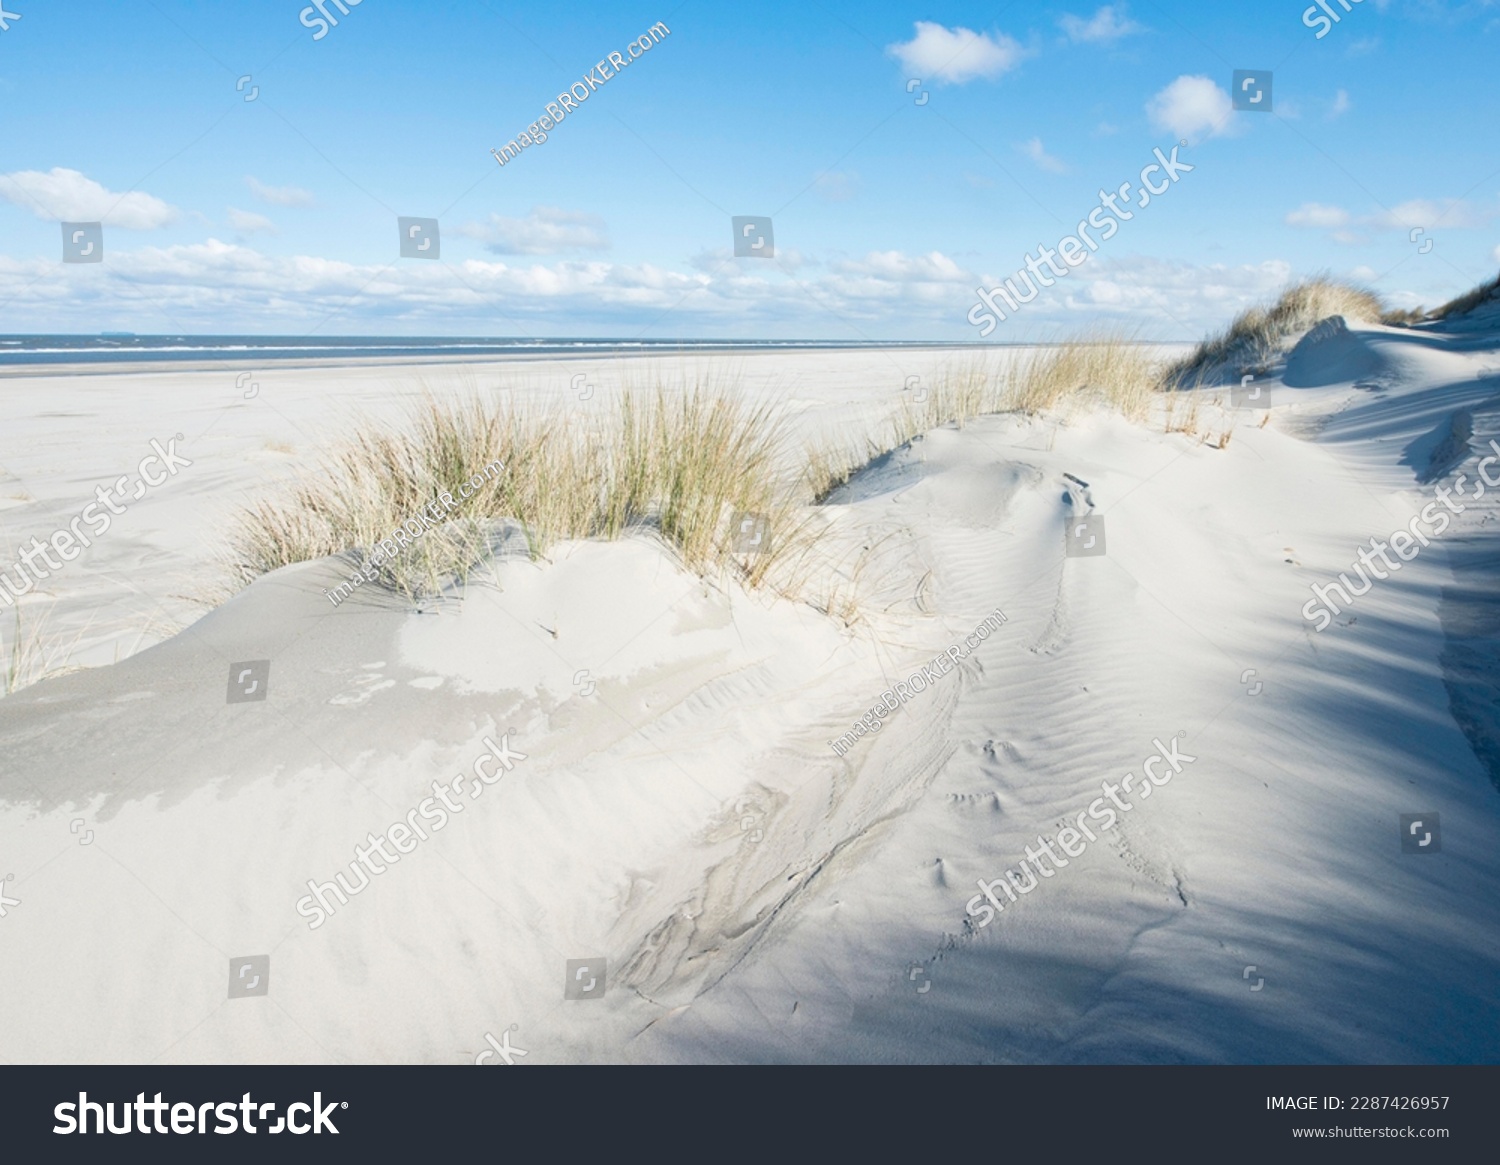 White dunes with beach grass, beach and North Sea, Langeoog, East Frisia, Lower Saxony, Germany #2287426957